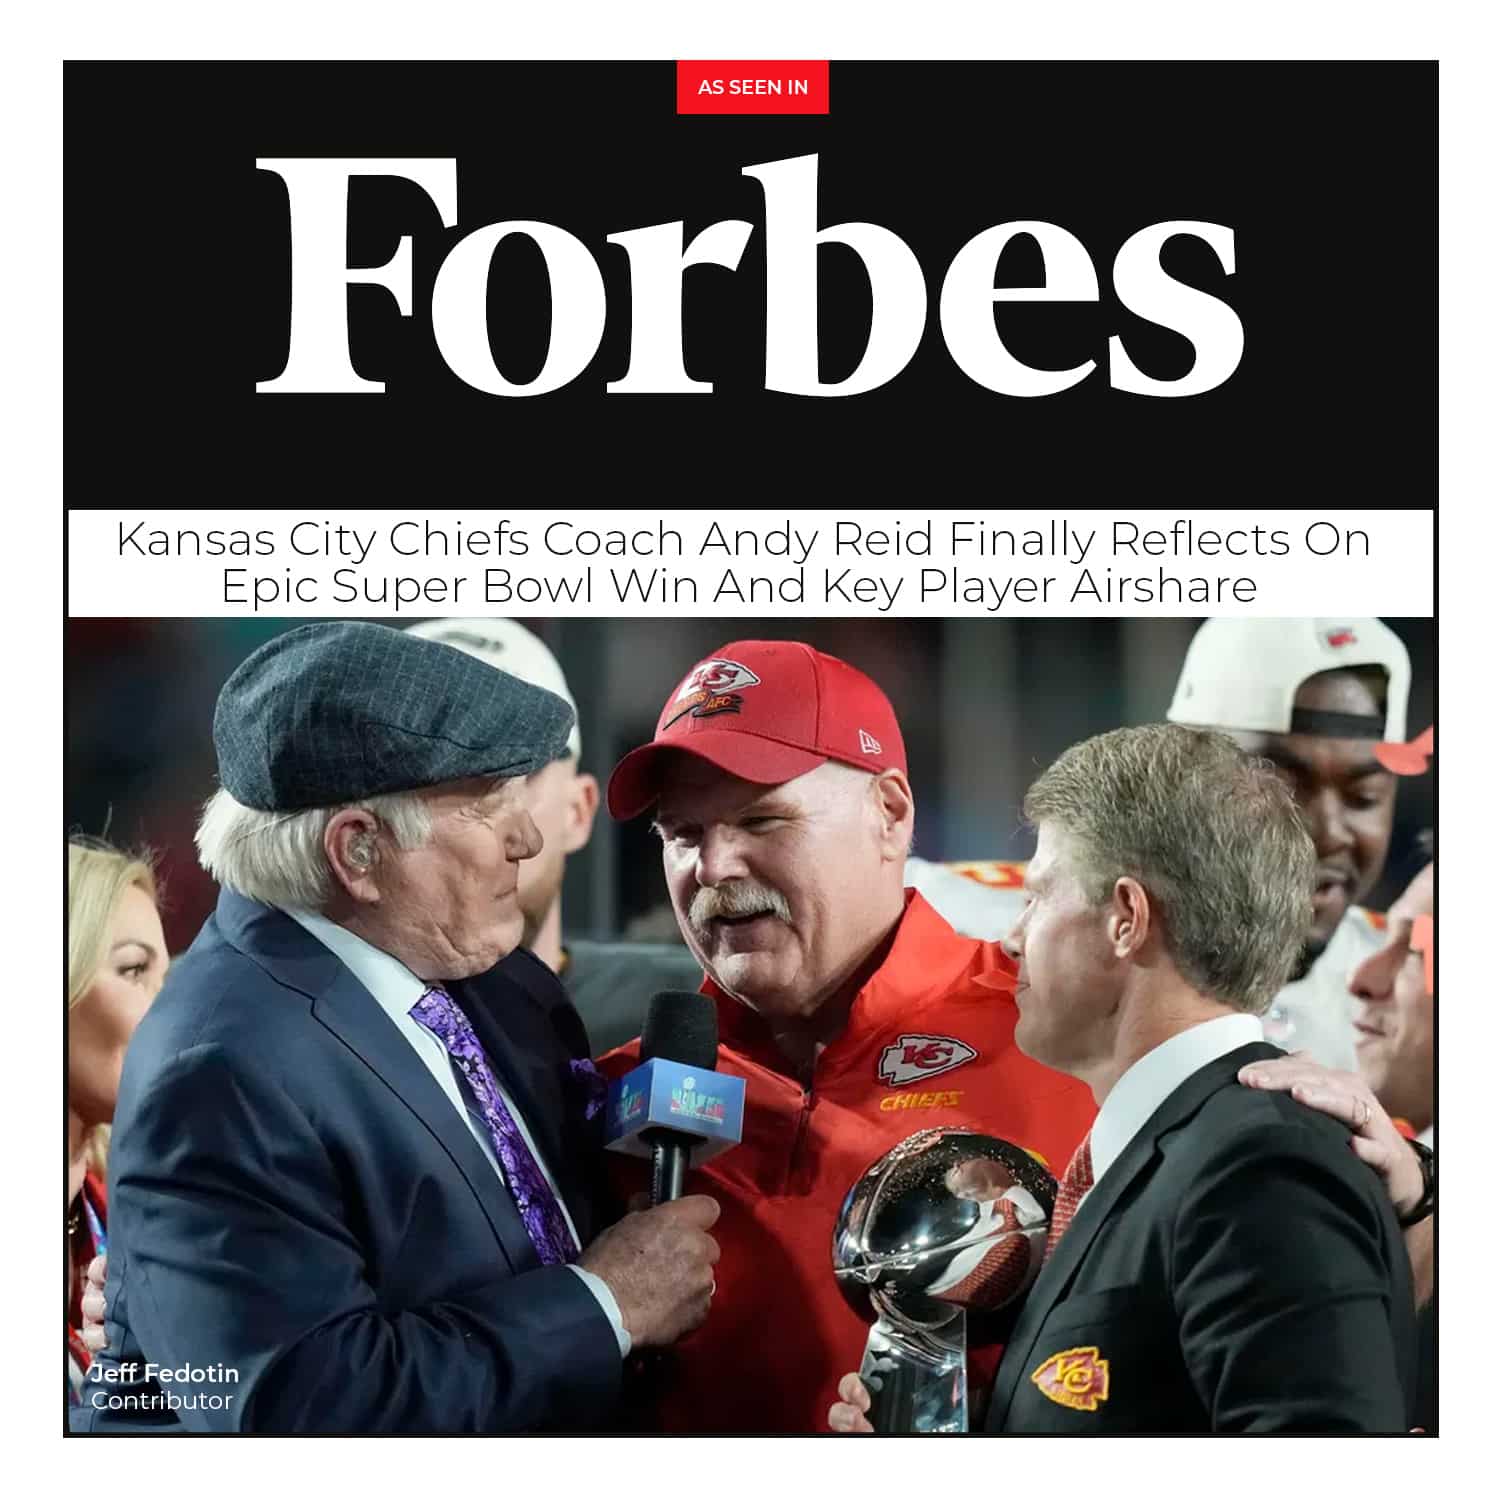 As Seen In Forbes Graphic depicting Kansas City Chiefs NFL Super Bowl Champions, Coach Andy Reid celebrating with Chiefs owner Clark Hunt and former NFL quarterback & broadcaster, Terry Bradshaw. 